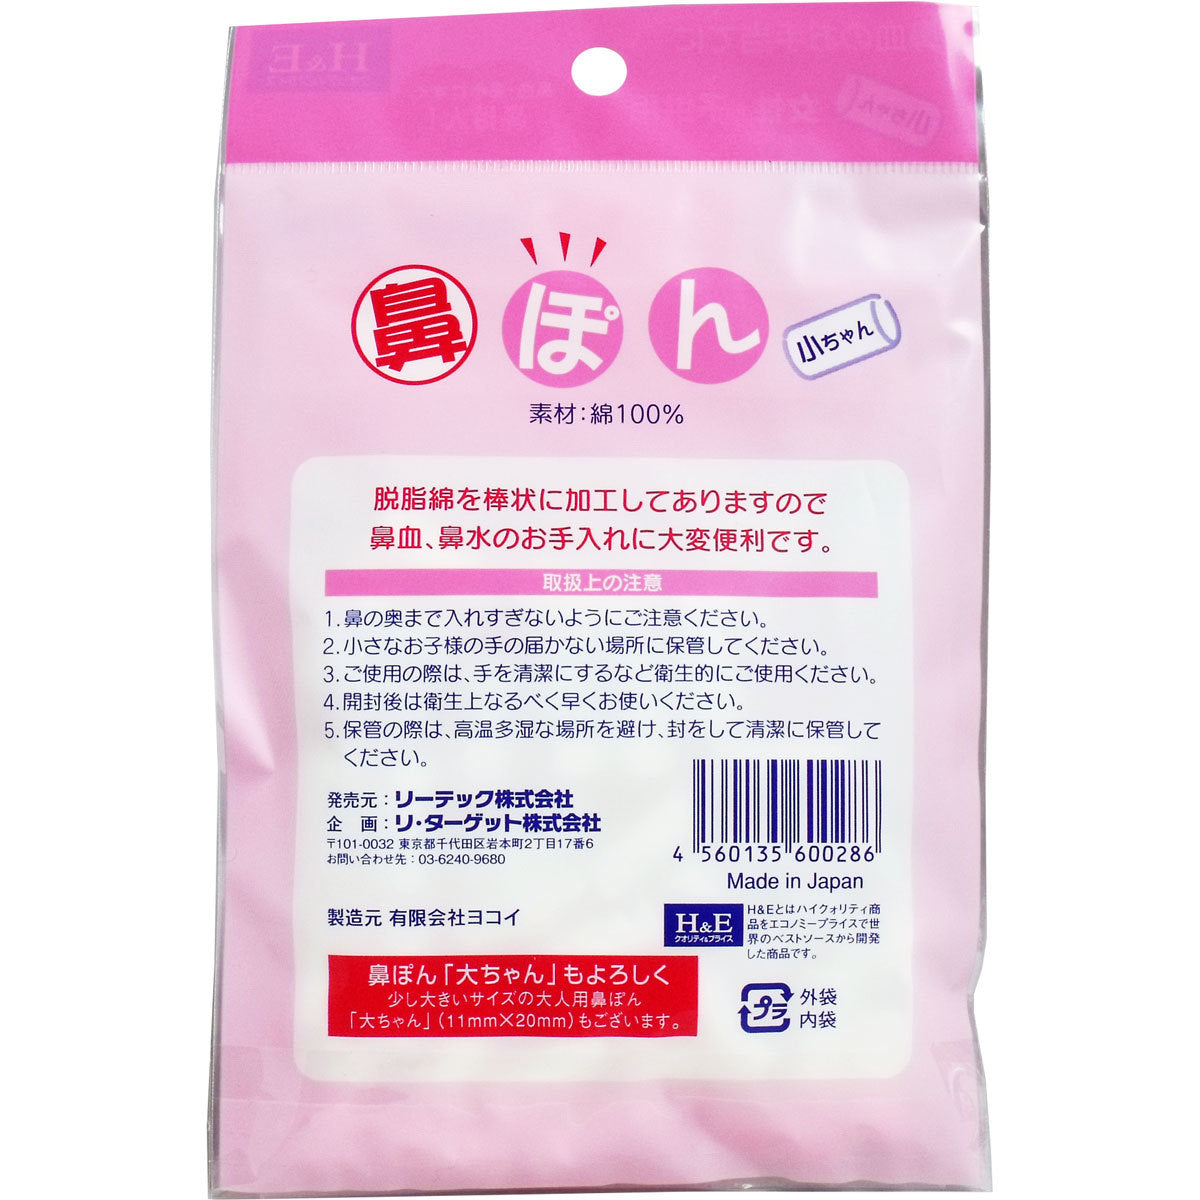 Made in Japan, hemostatic cotton, nosebleed tampons, cotton balls, household essentials, good helper for nosebleeds, nosebleed cotton balls, runny nose, nosebleed stopper